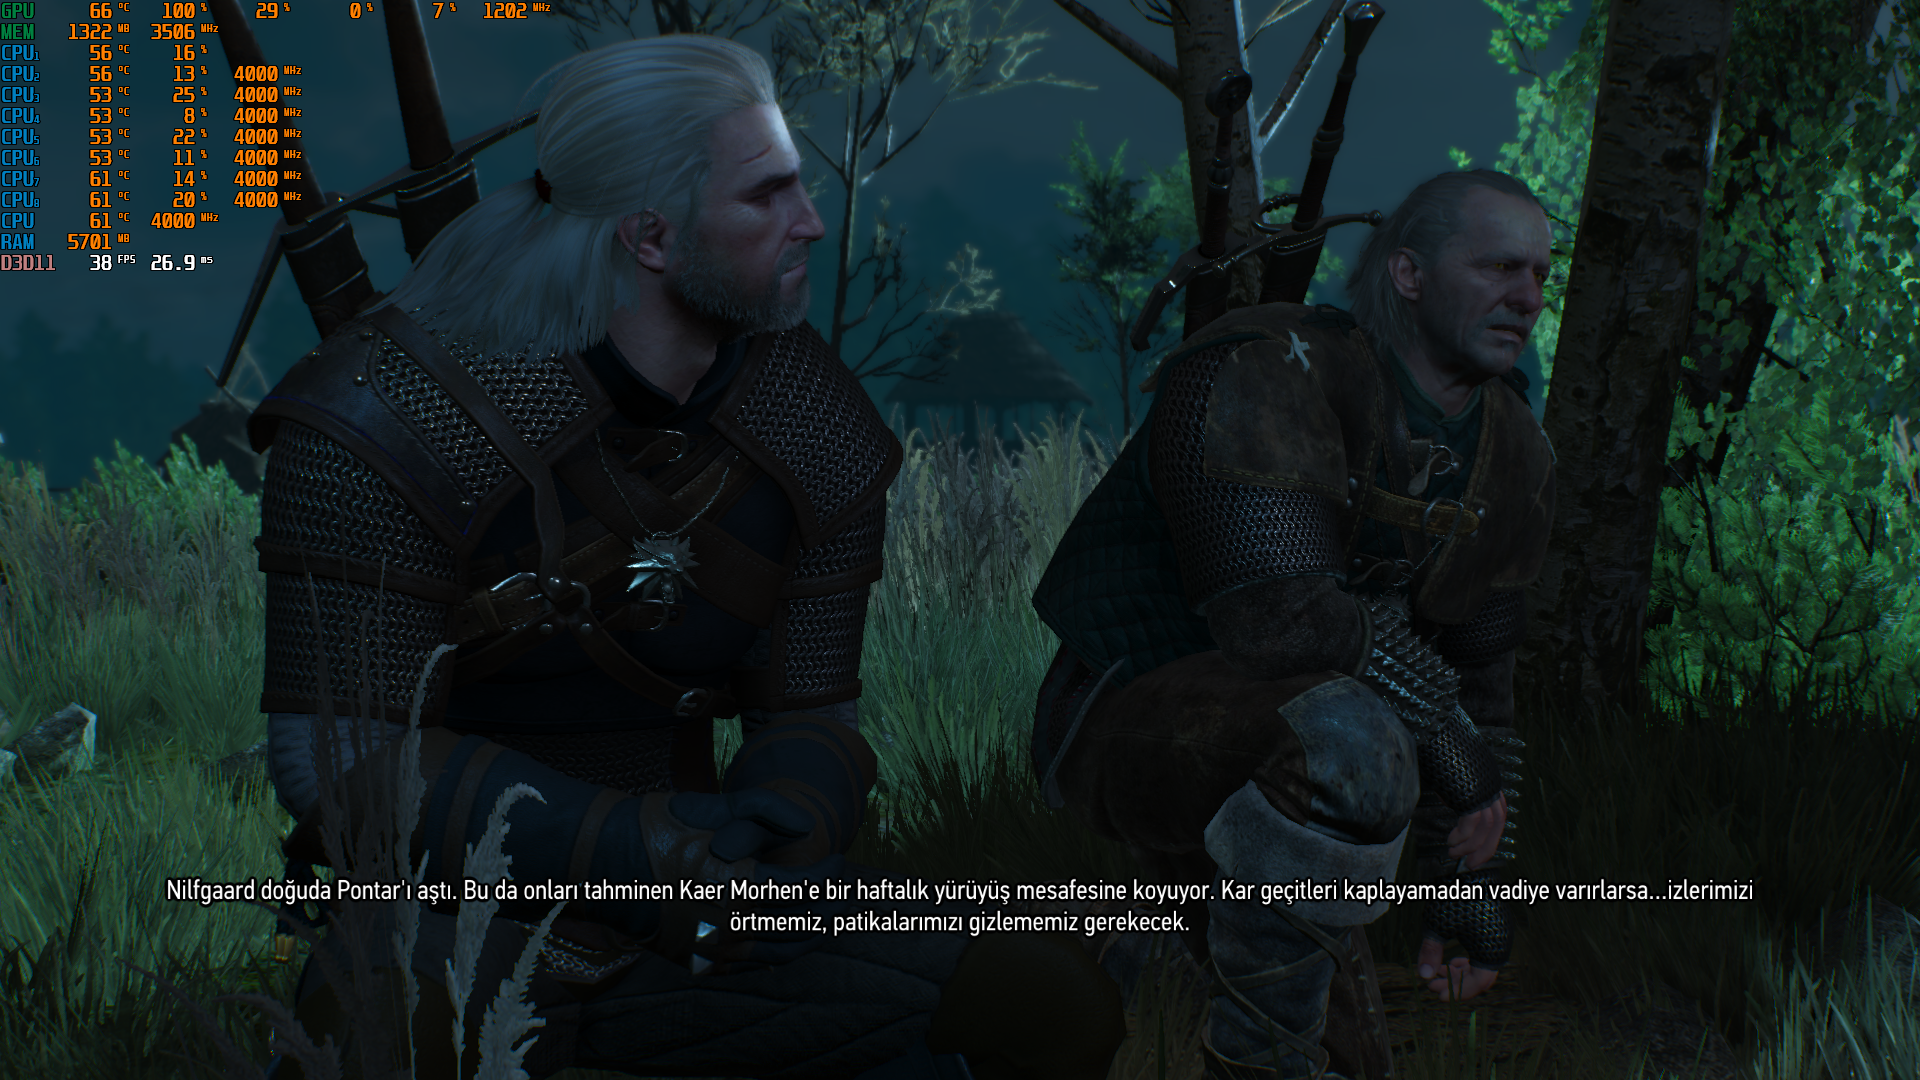 witcher3_2021_04_26_02_10_19_429.png